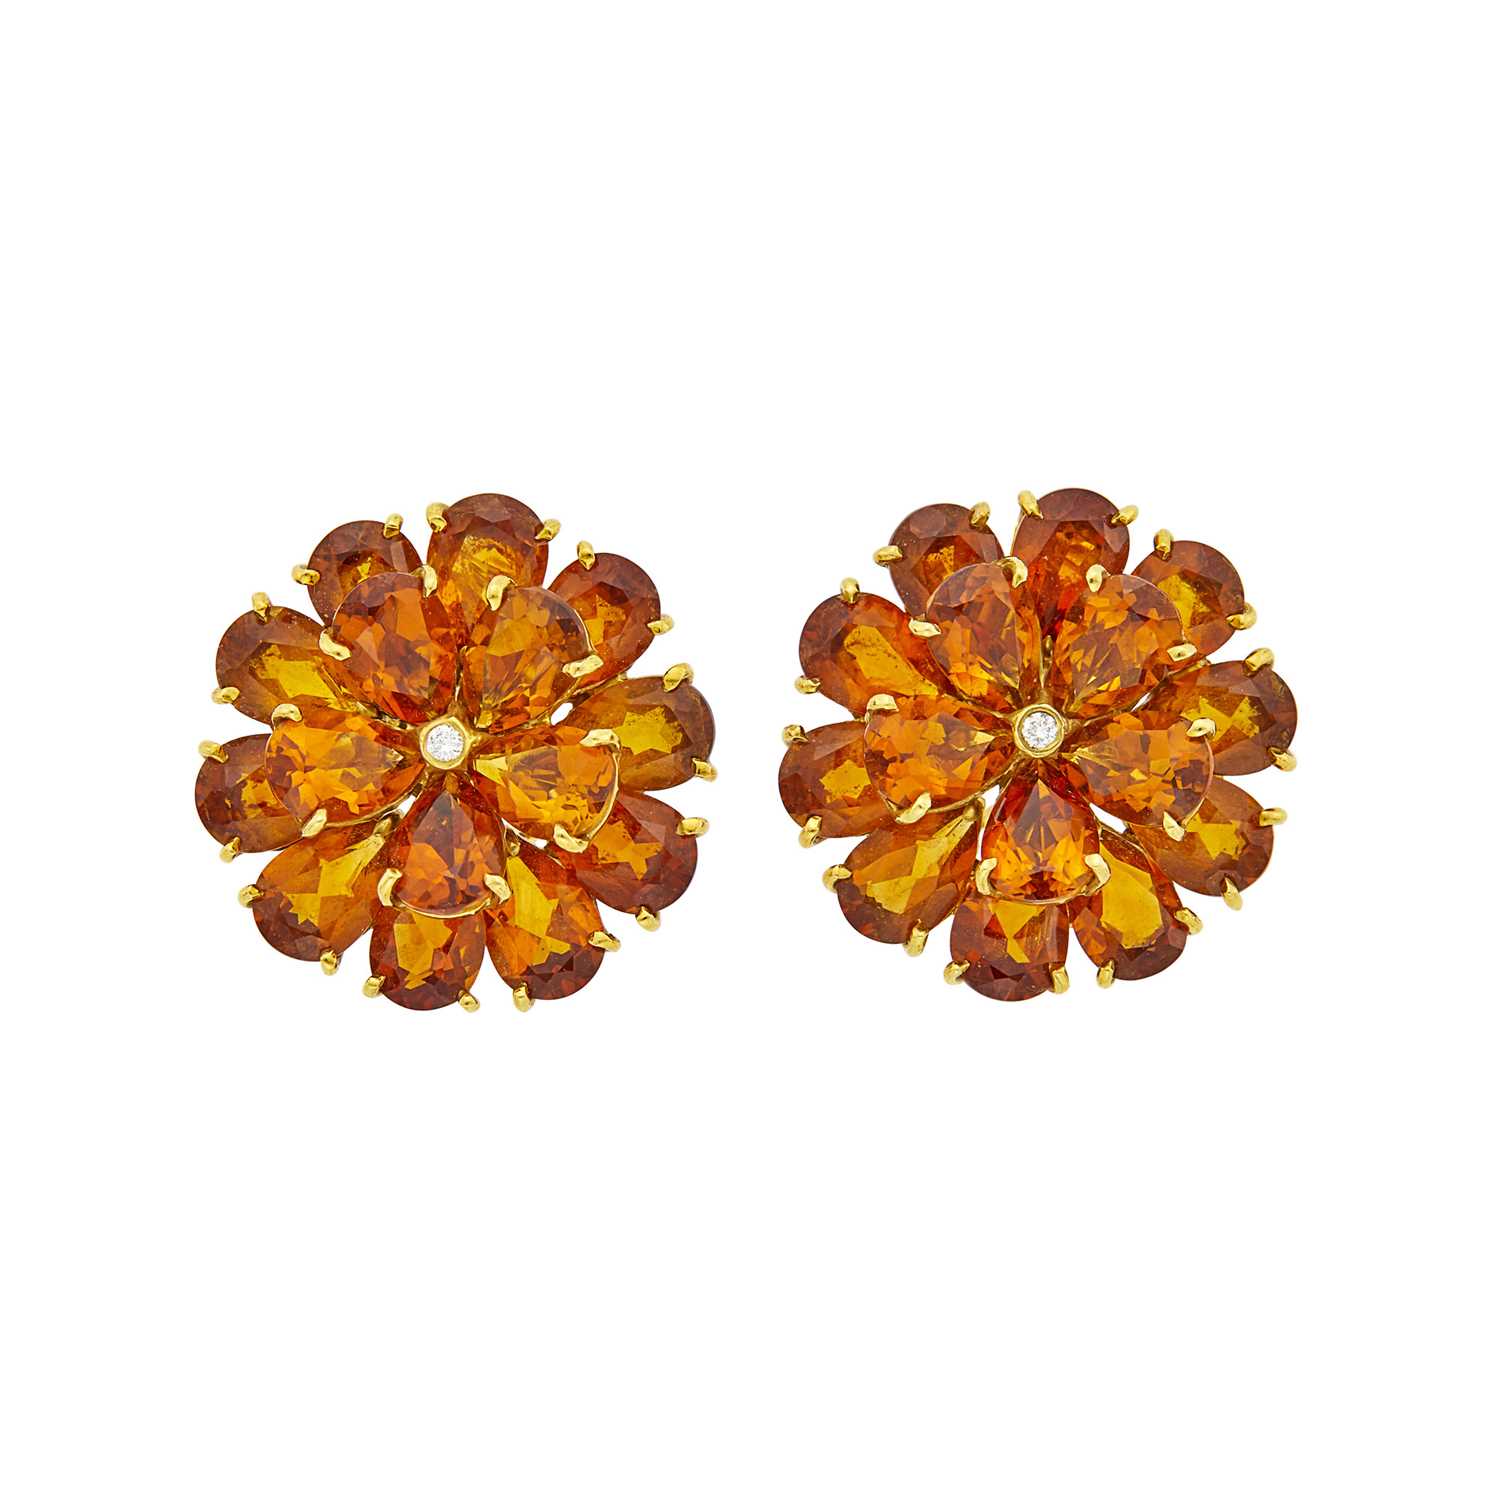 Lot 1026 - Pair of Gold, Citrine and Diamond Flower Earclips